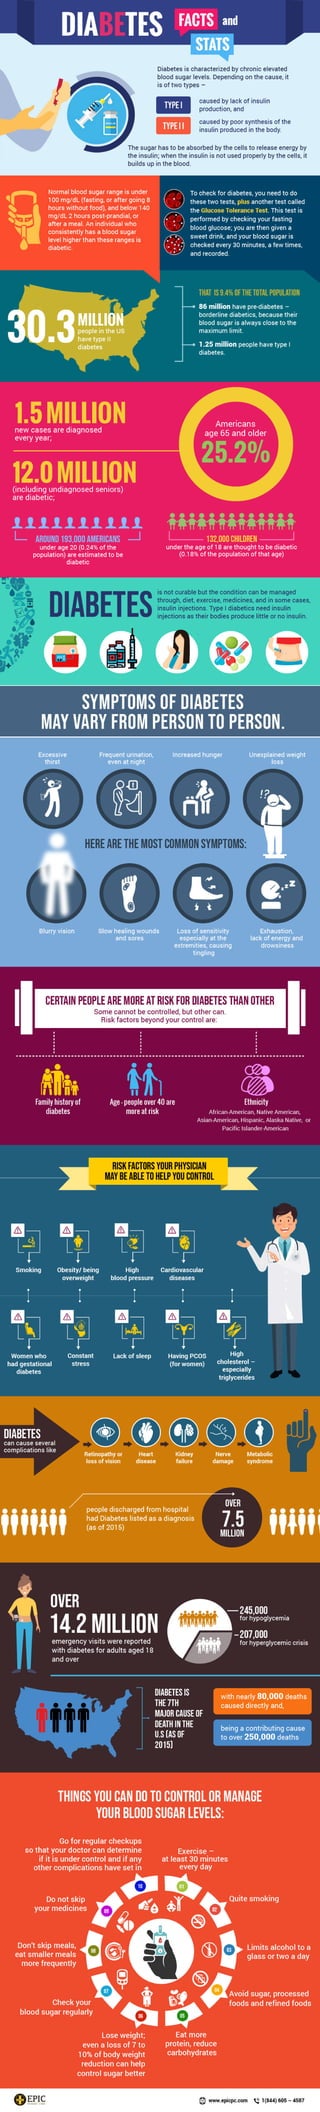 Interesting Facts and Statistics about Diabetes